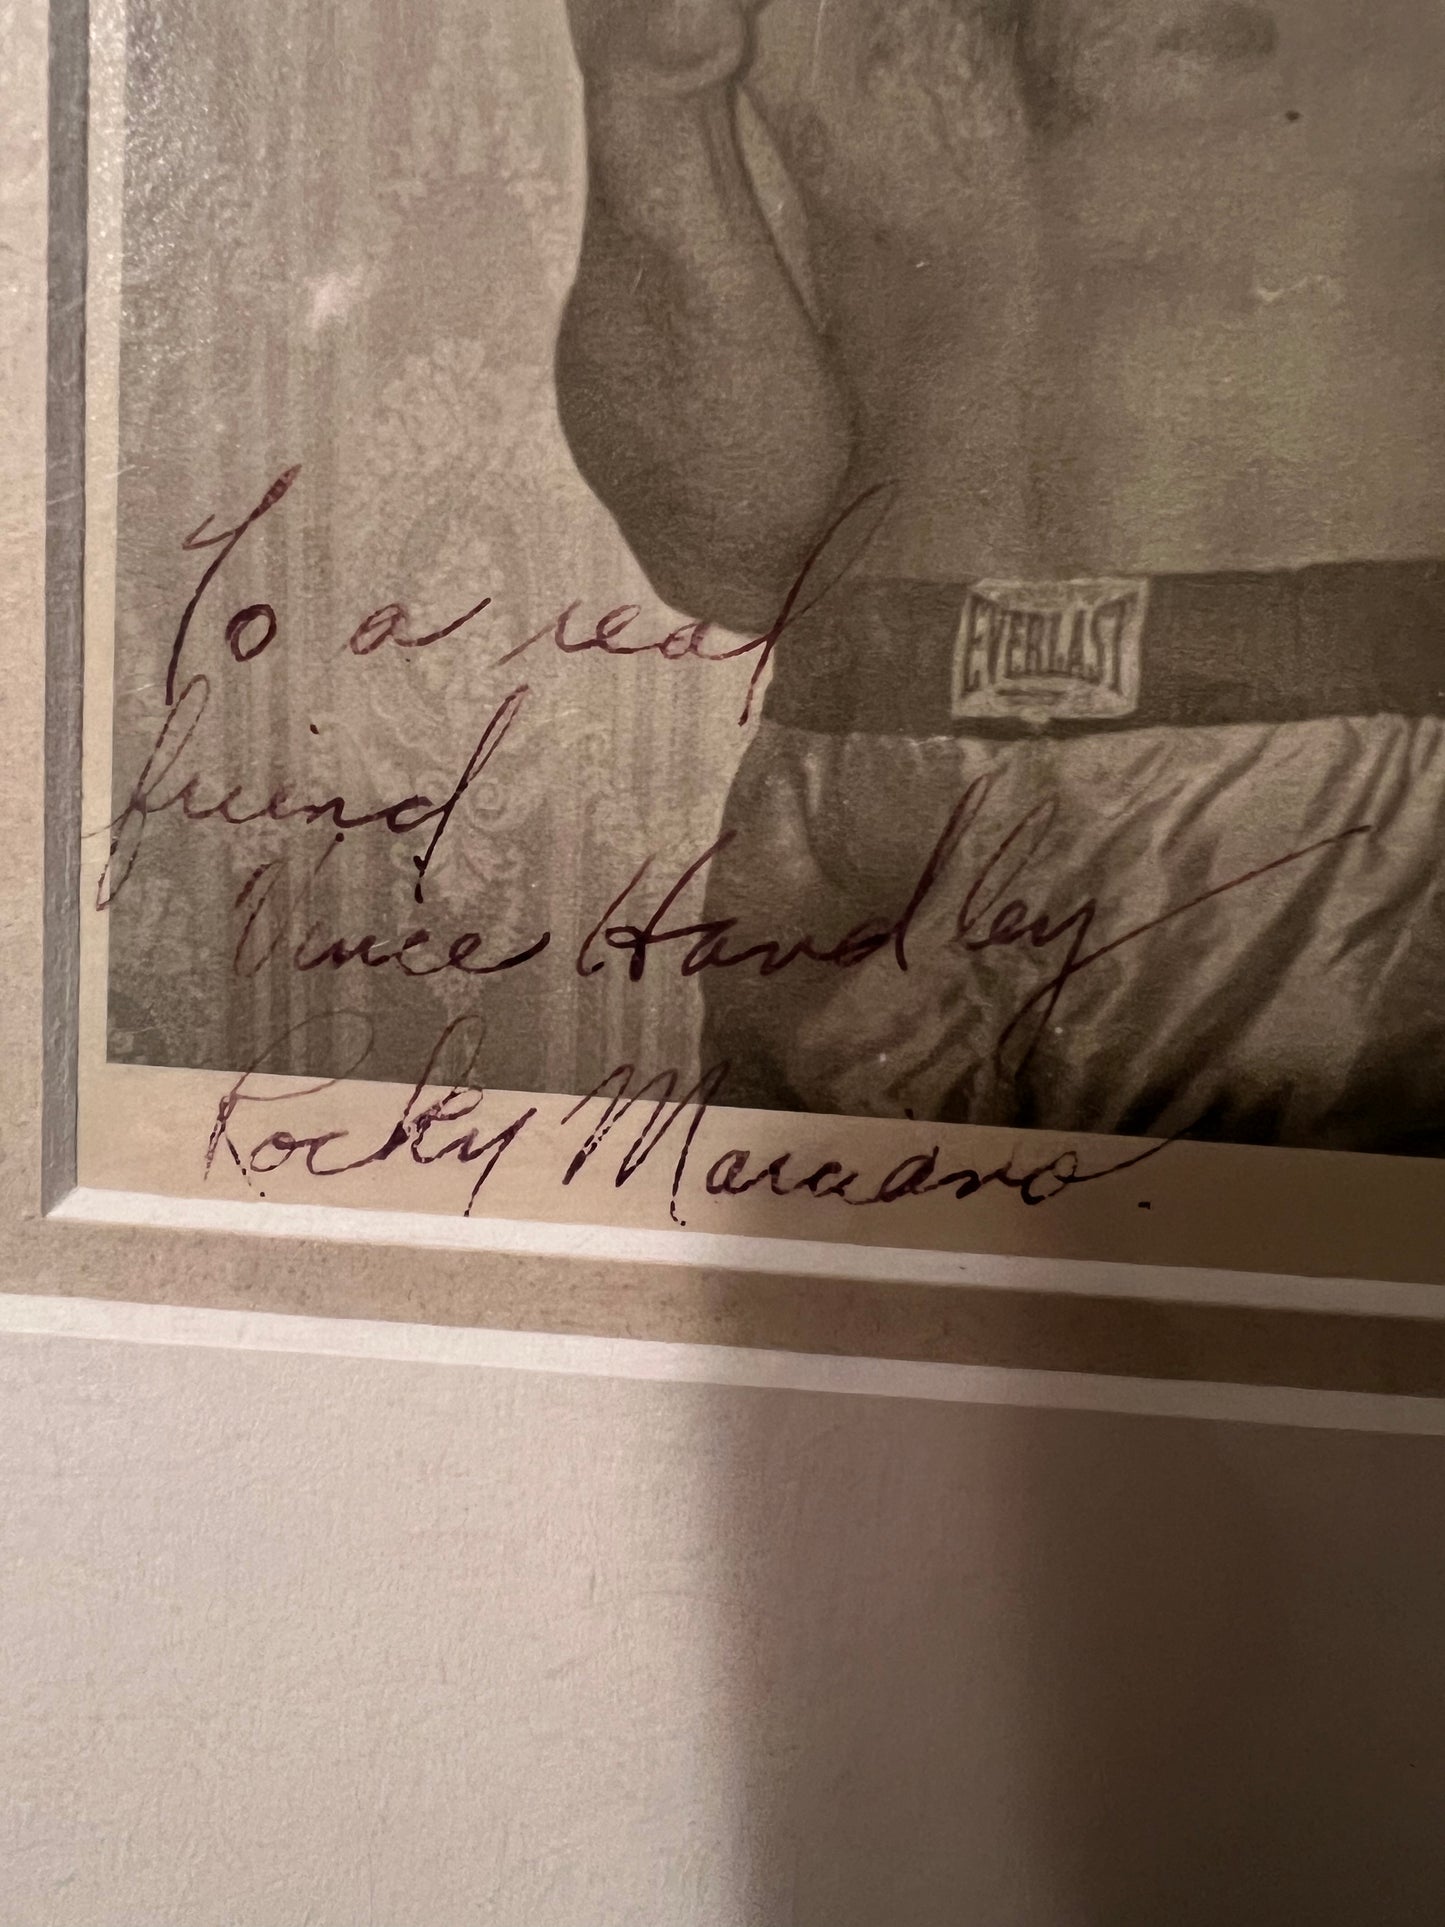 Rocky Marciano hand signed original photo signed to vince Handley 4x5 young image rare